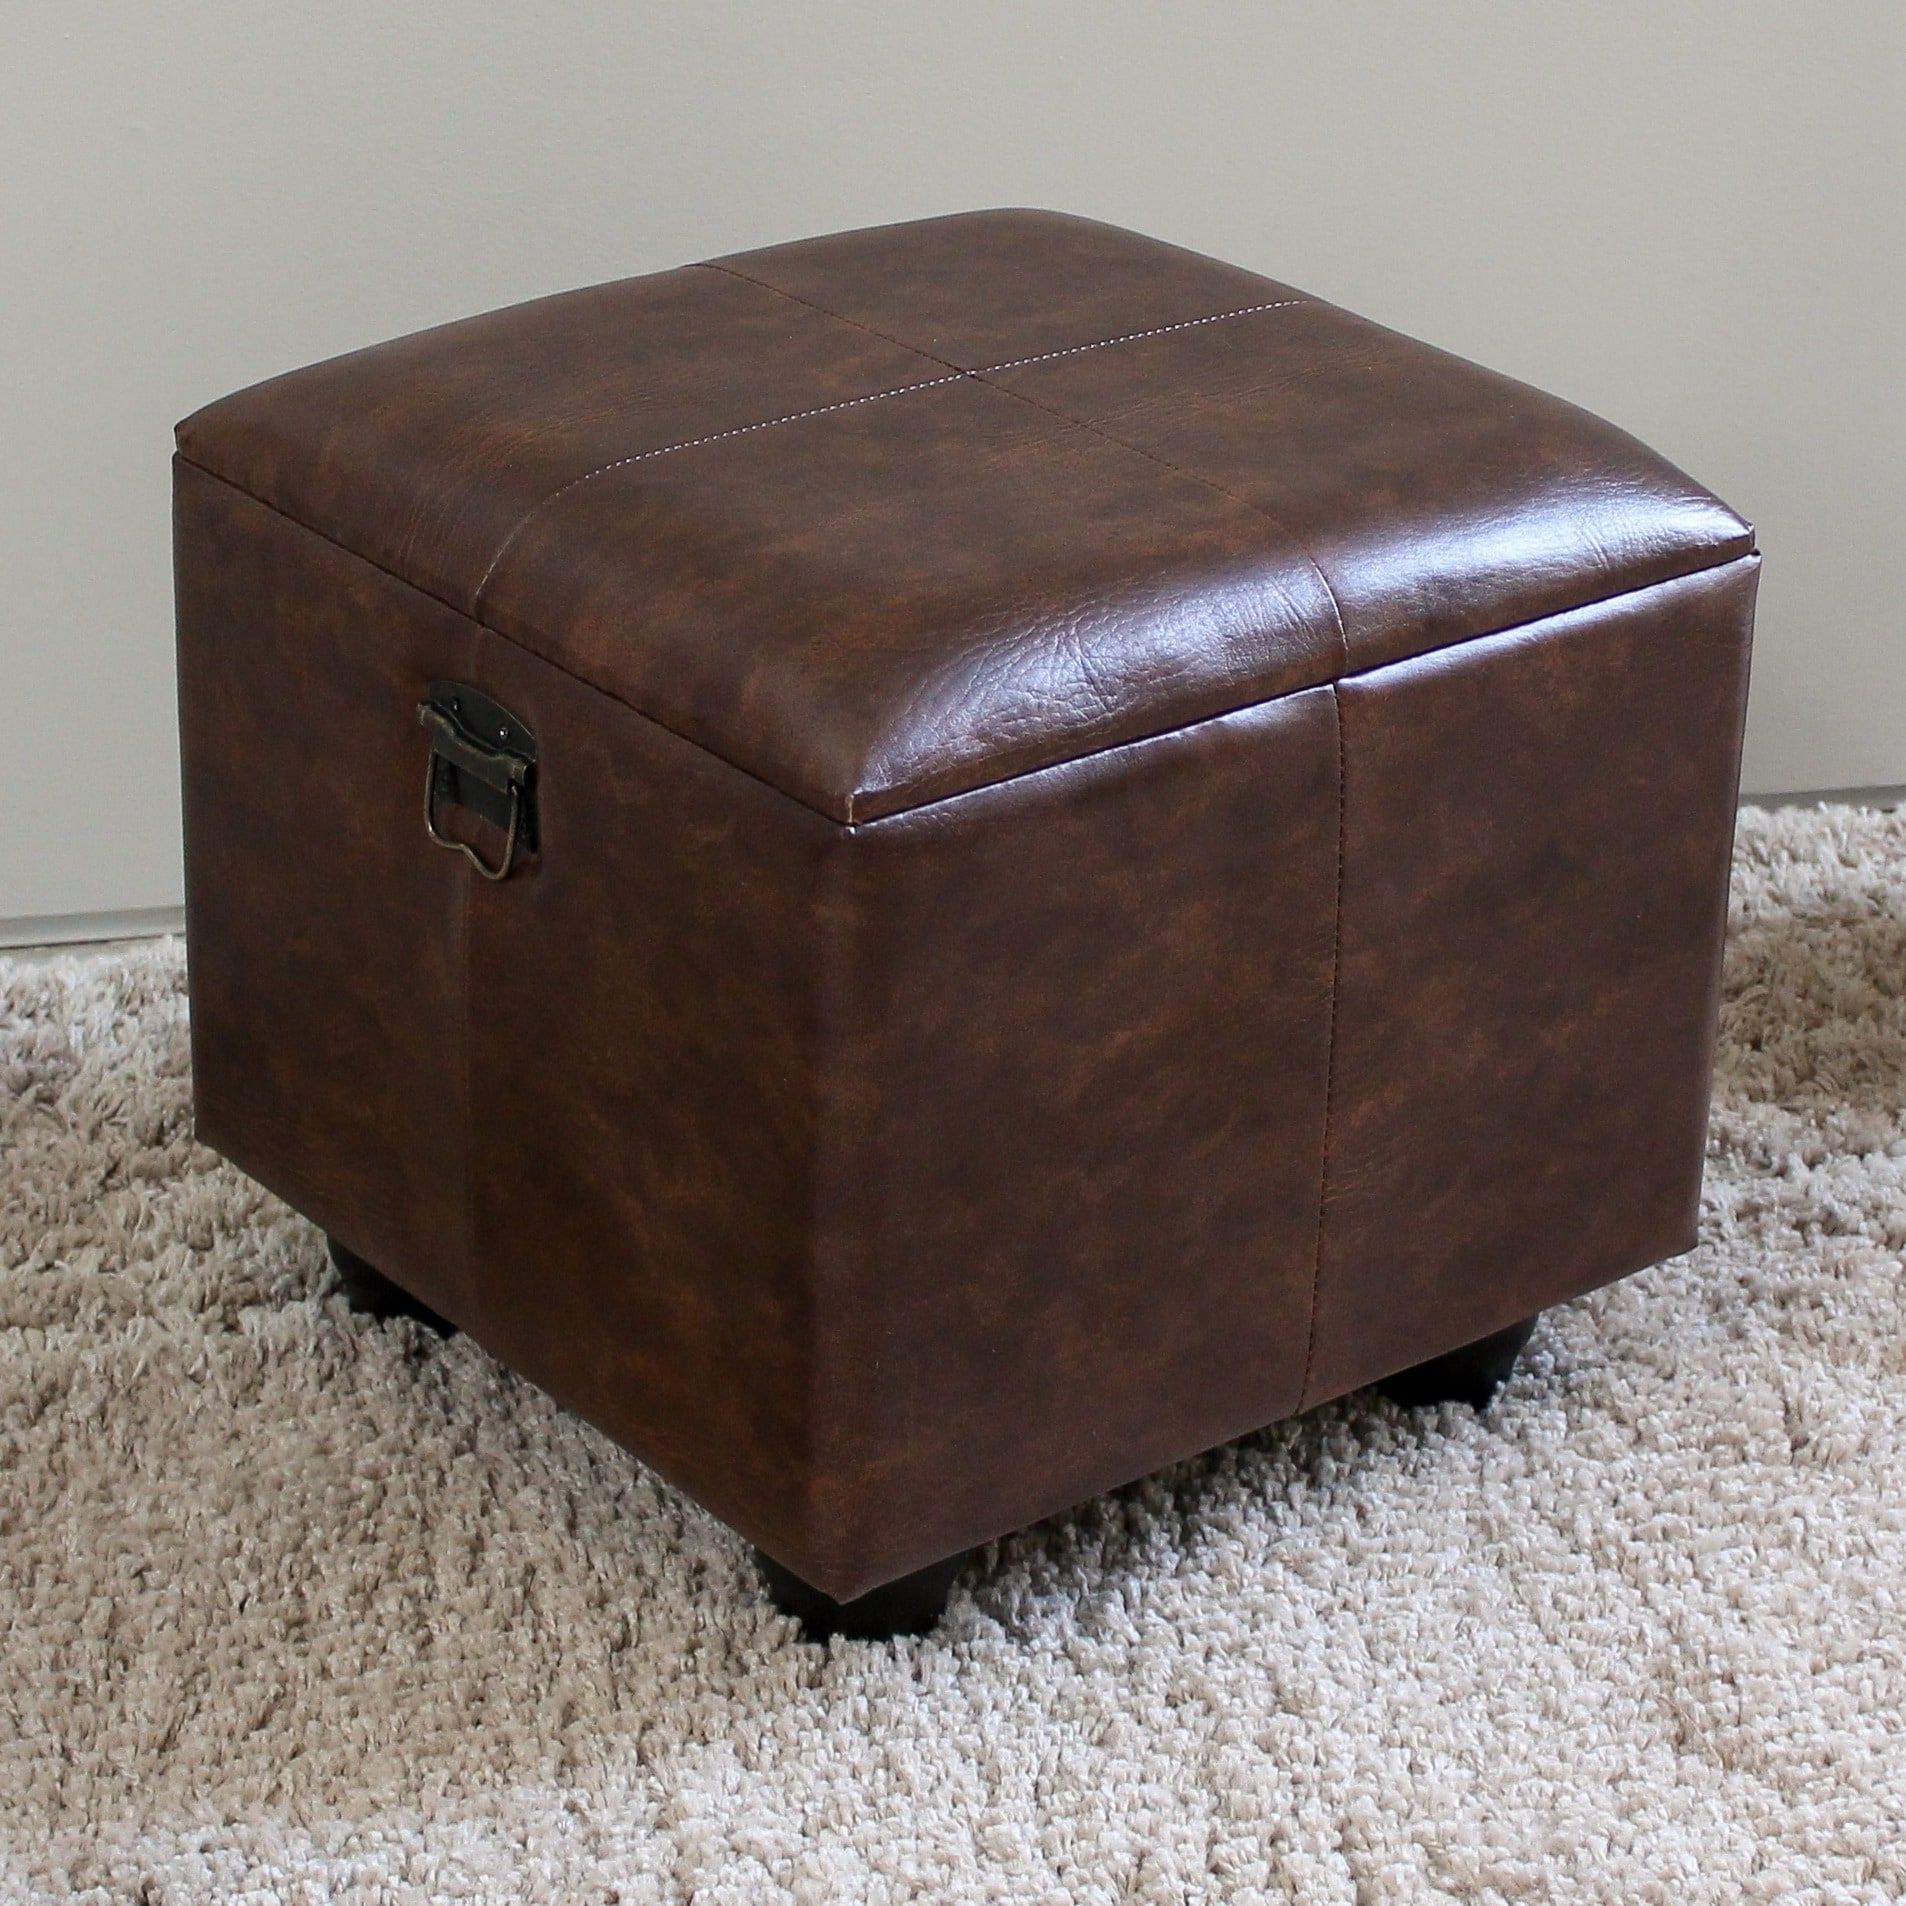 International Caravan Carmel Square Storage Ottoman | Ebay With Silver Faux Leather Ottomans With Pull Tab (View 16 of 20)